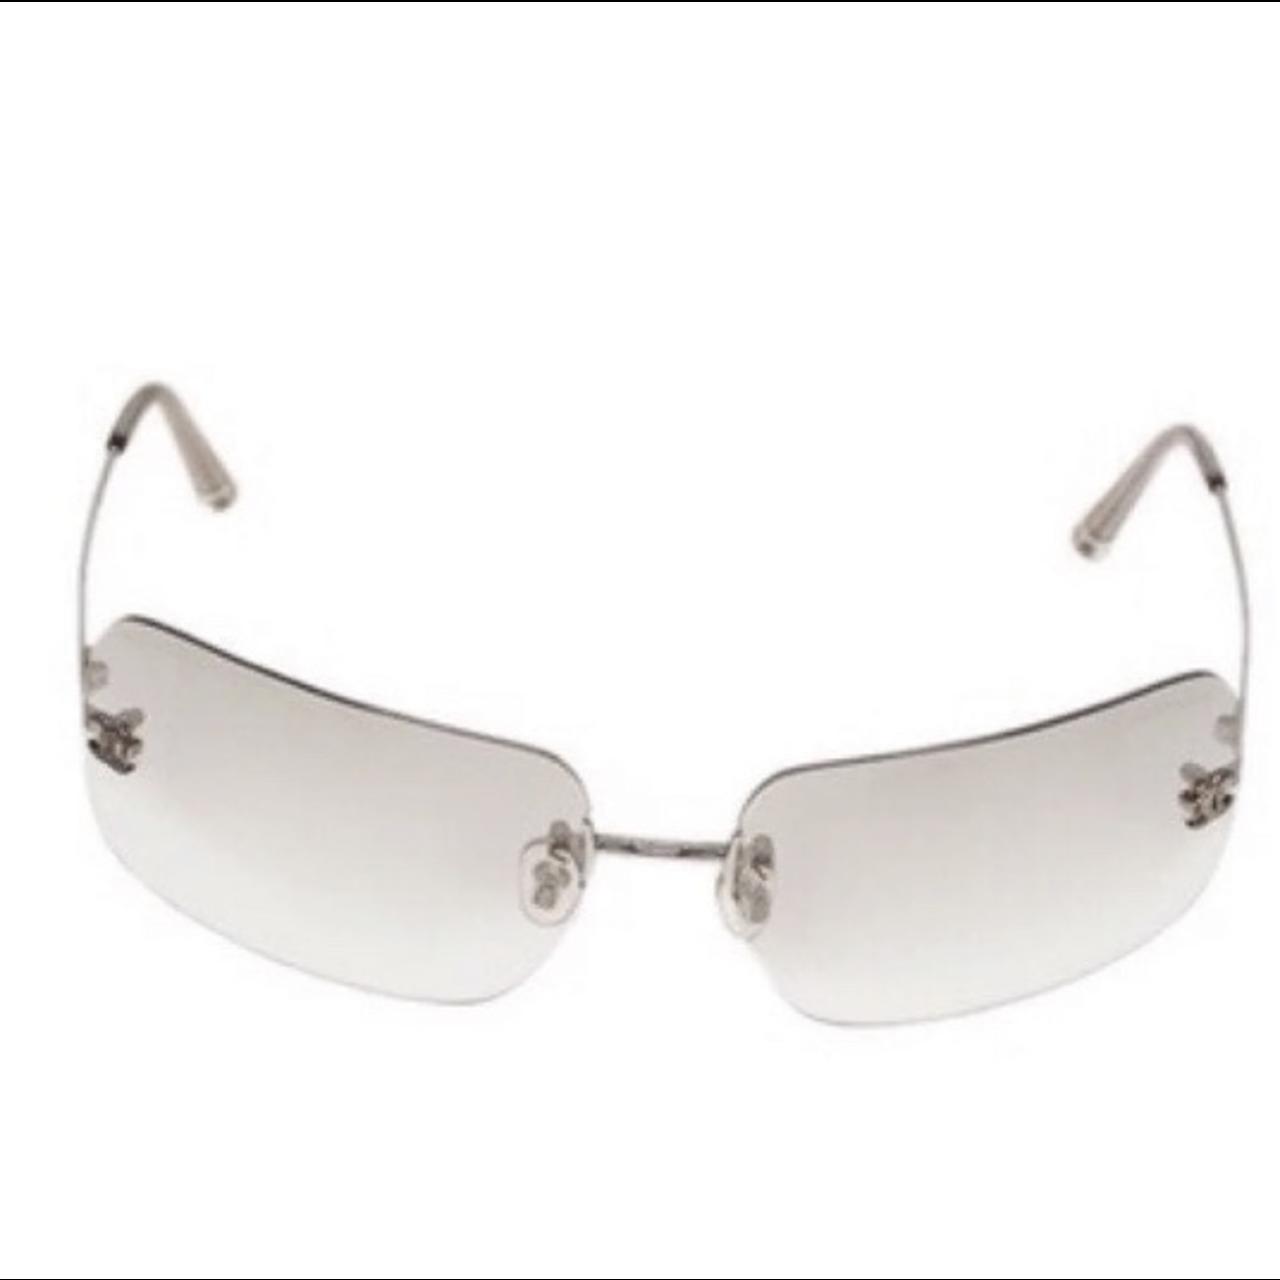 Pink ombré authentic Chanel rimless sunglasses with